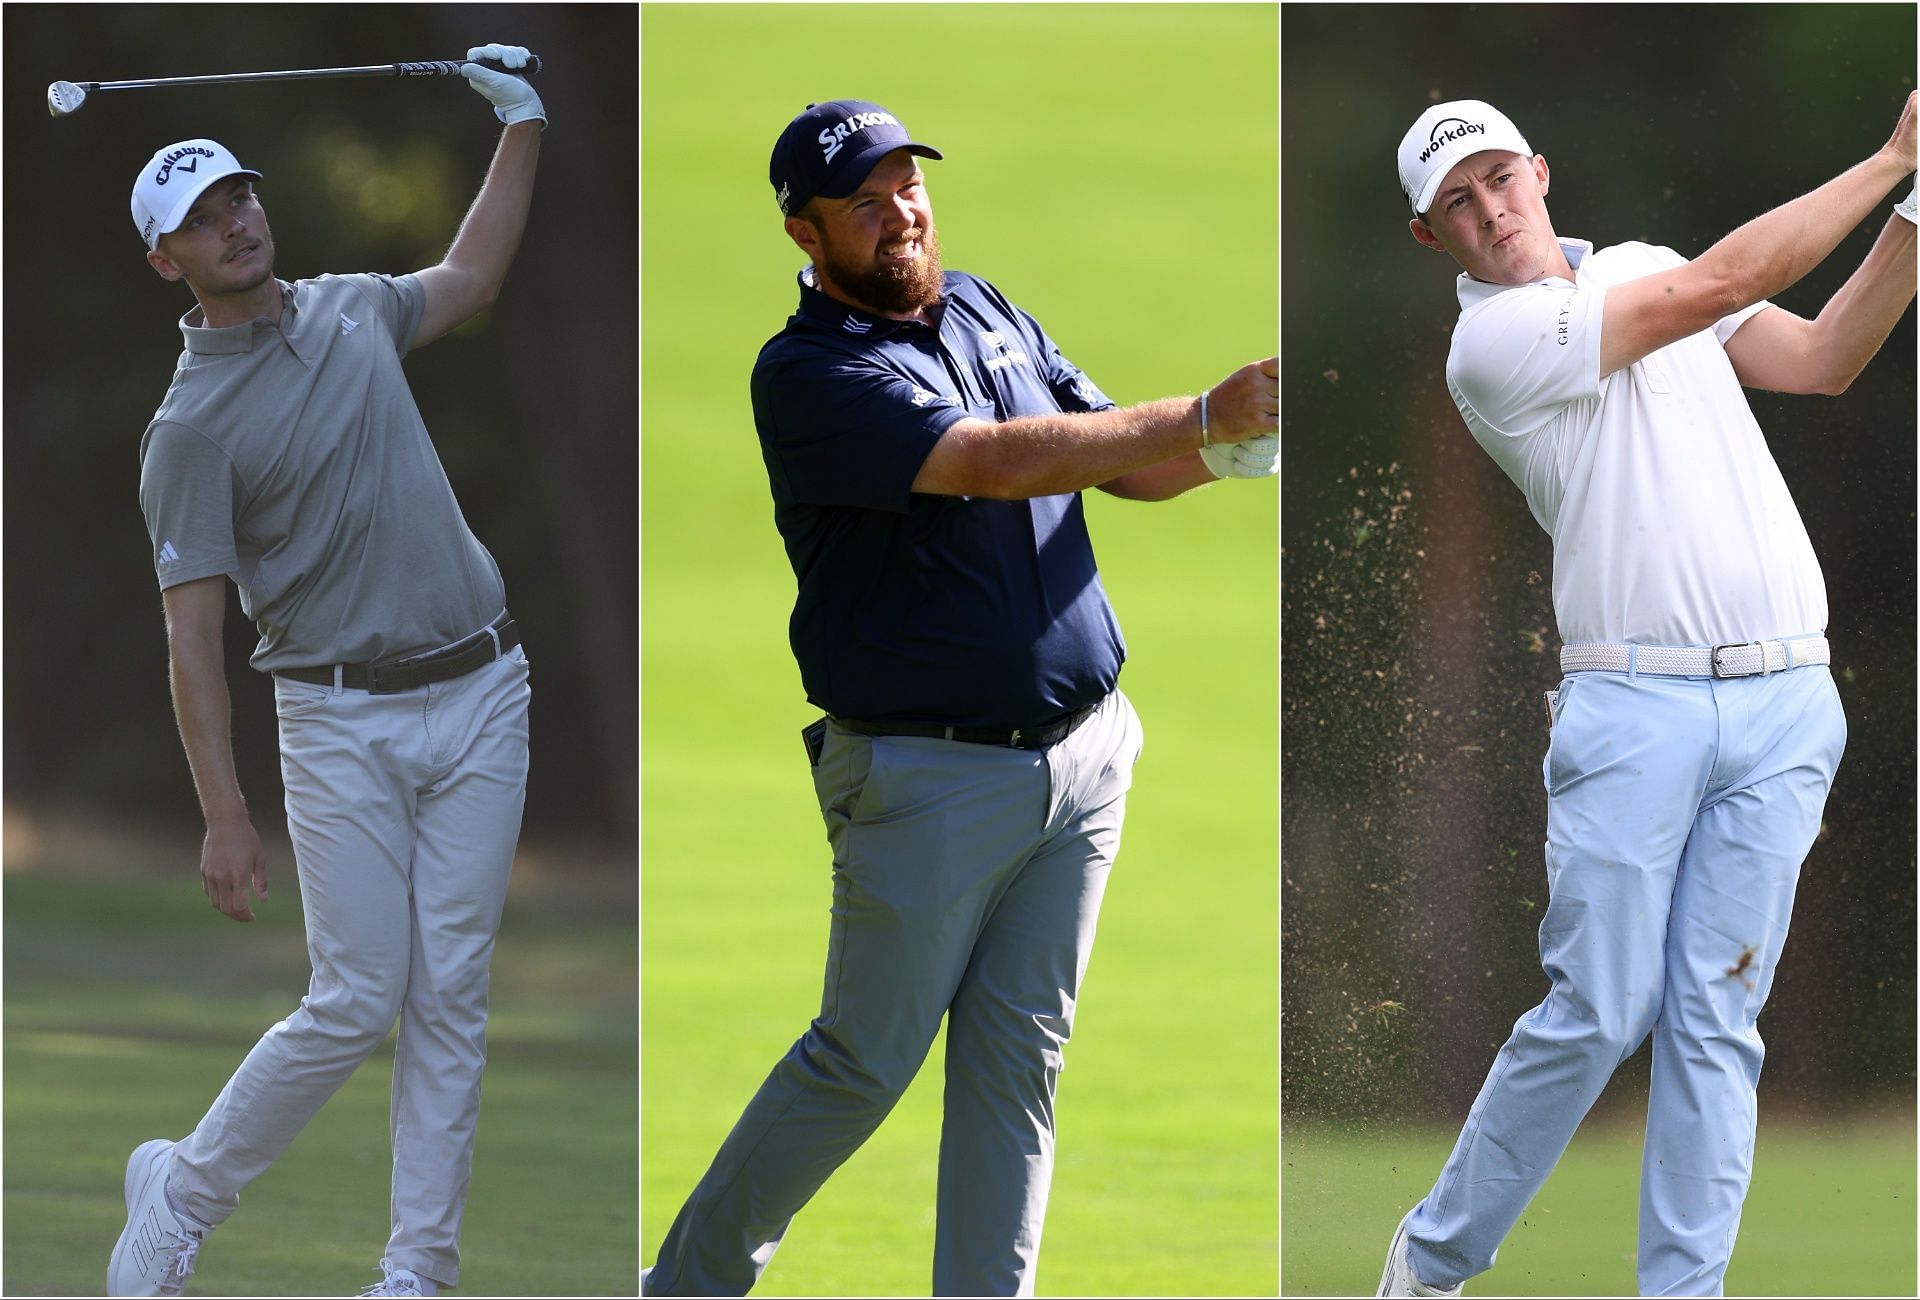 Nicolai Hojgaard, Matt Fitzpatrick, and Shane Lowry, three of the European Ryder Cup team players (via getty Images)